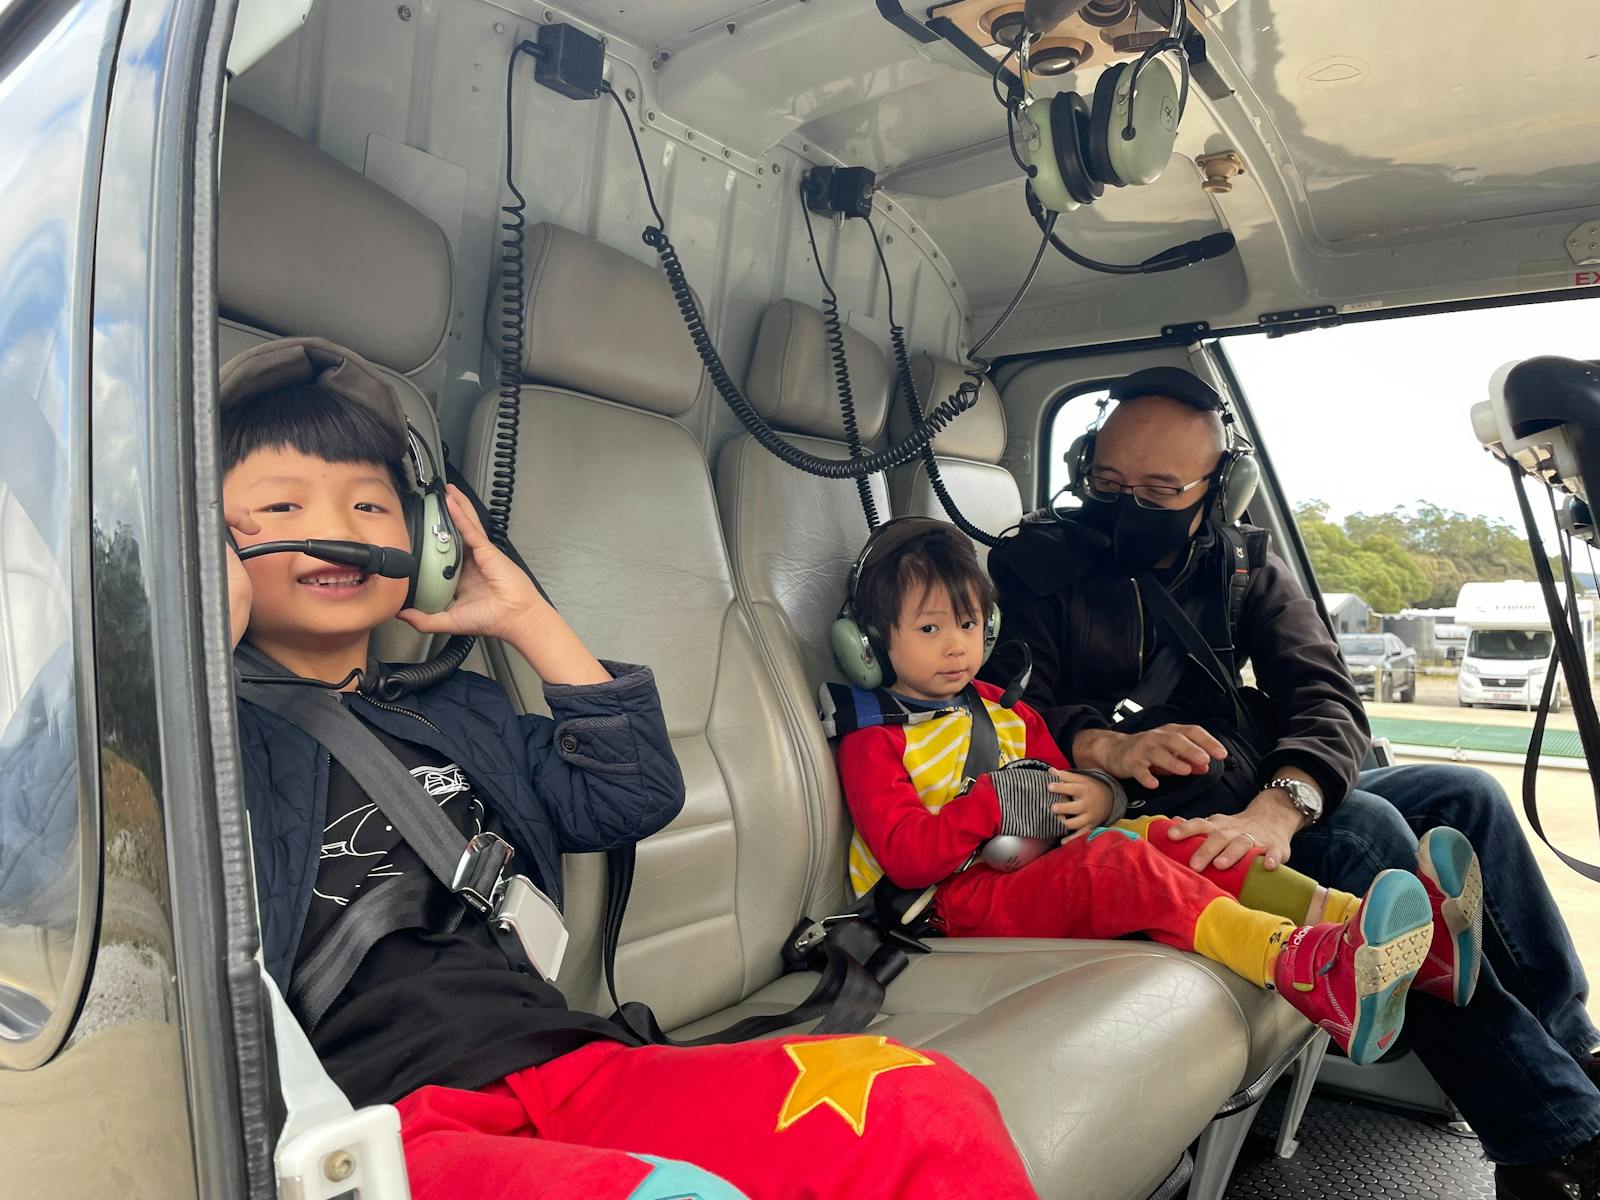 Two young children with their father smiling at the camera, with headsets on and ready to fly.